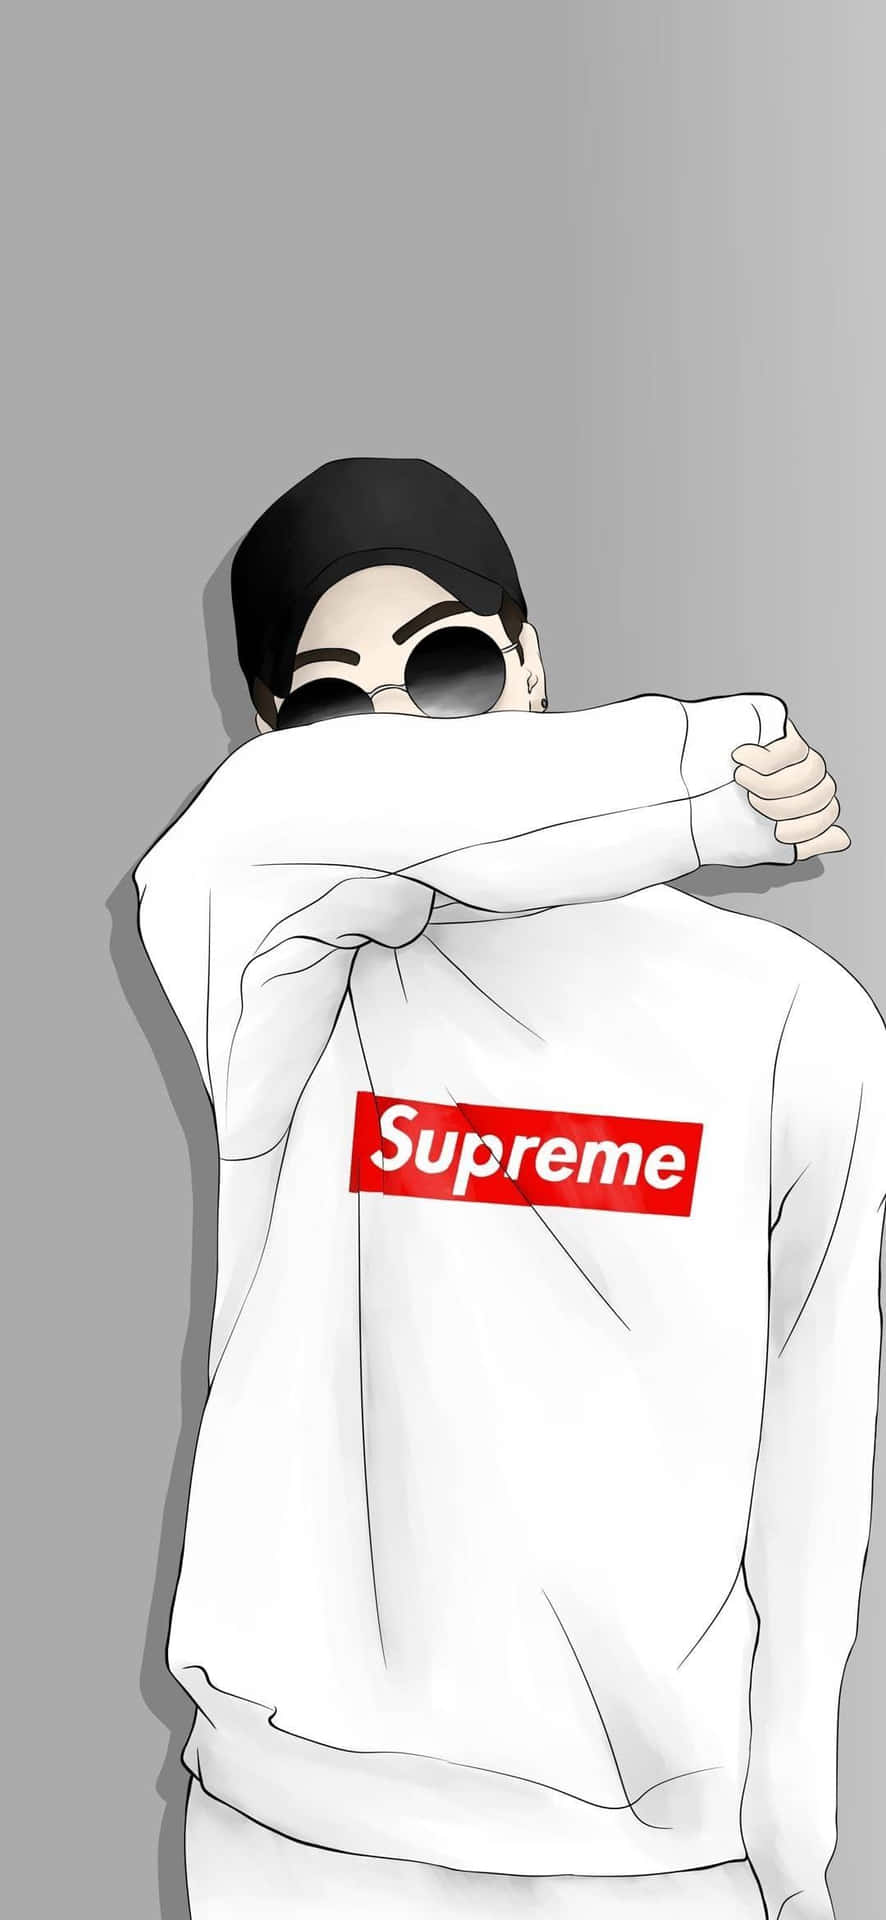 Always stay fresh with Supreme! Wallpaper